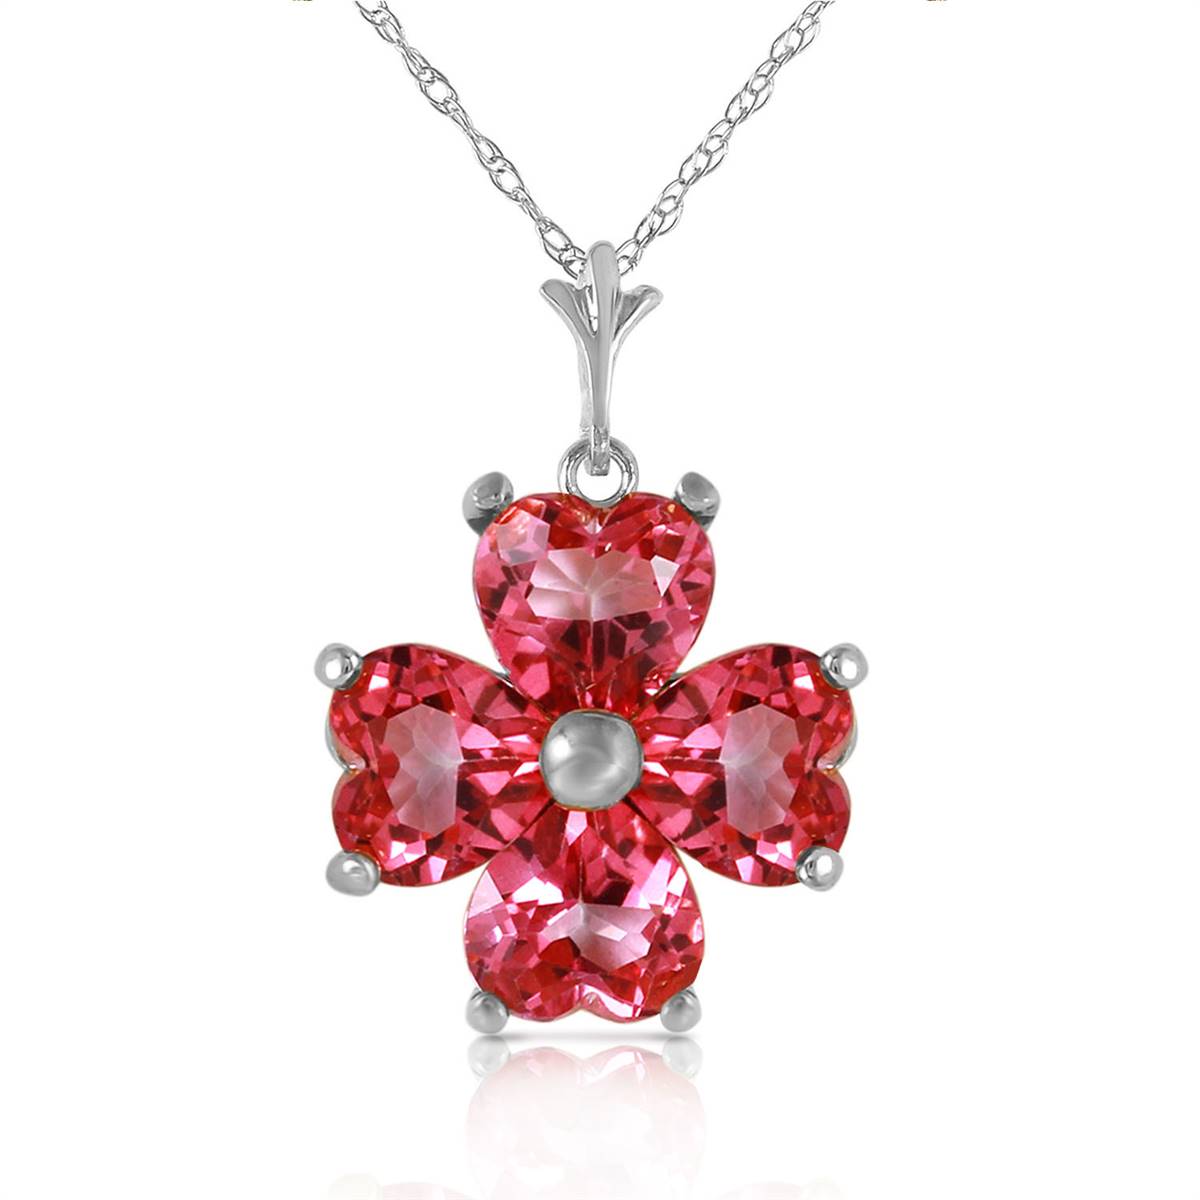 3.8 Carat 14K Solid White Gold Induced Response Pink Topaz Necklace